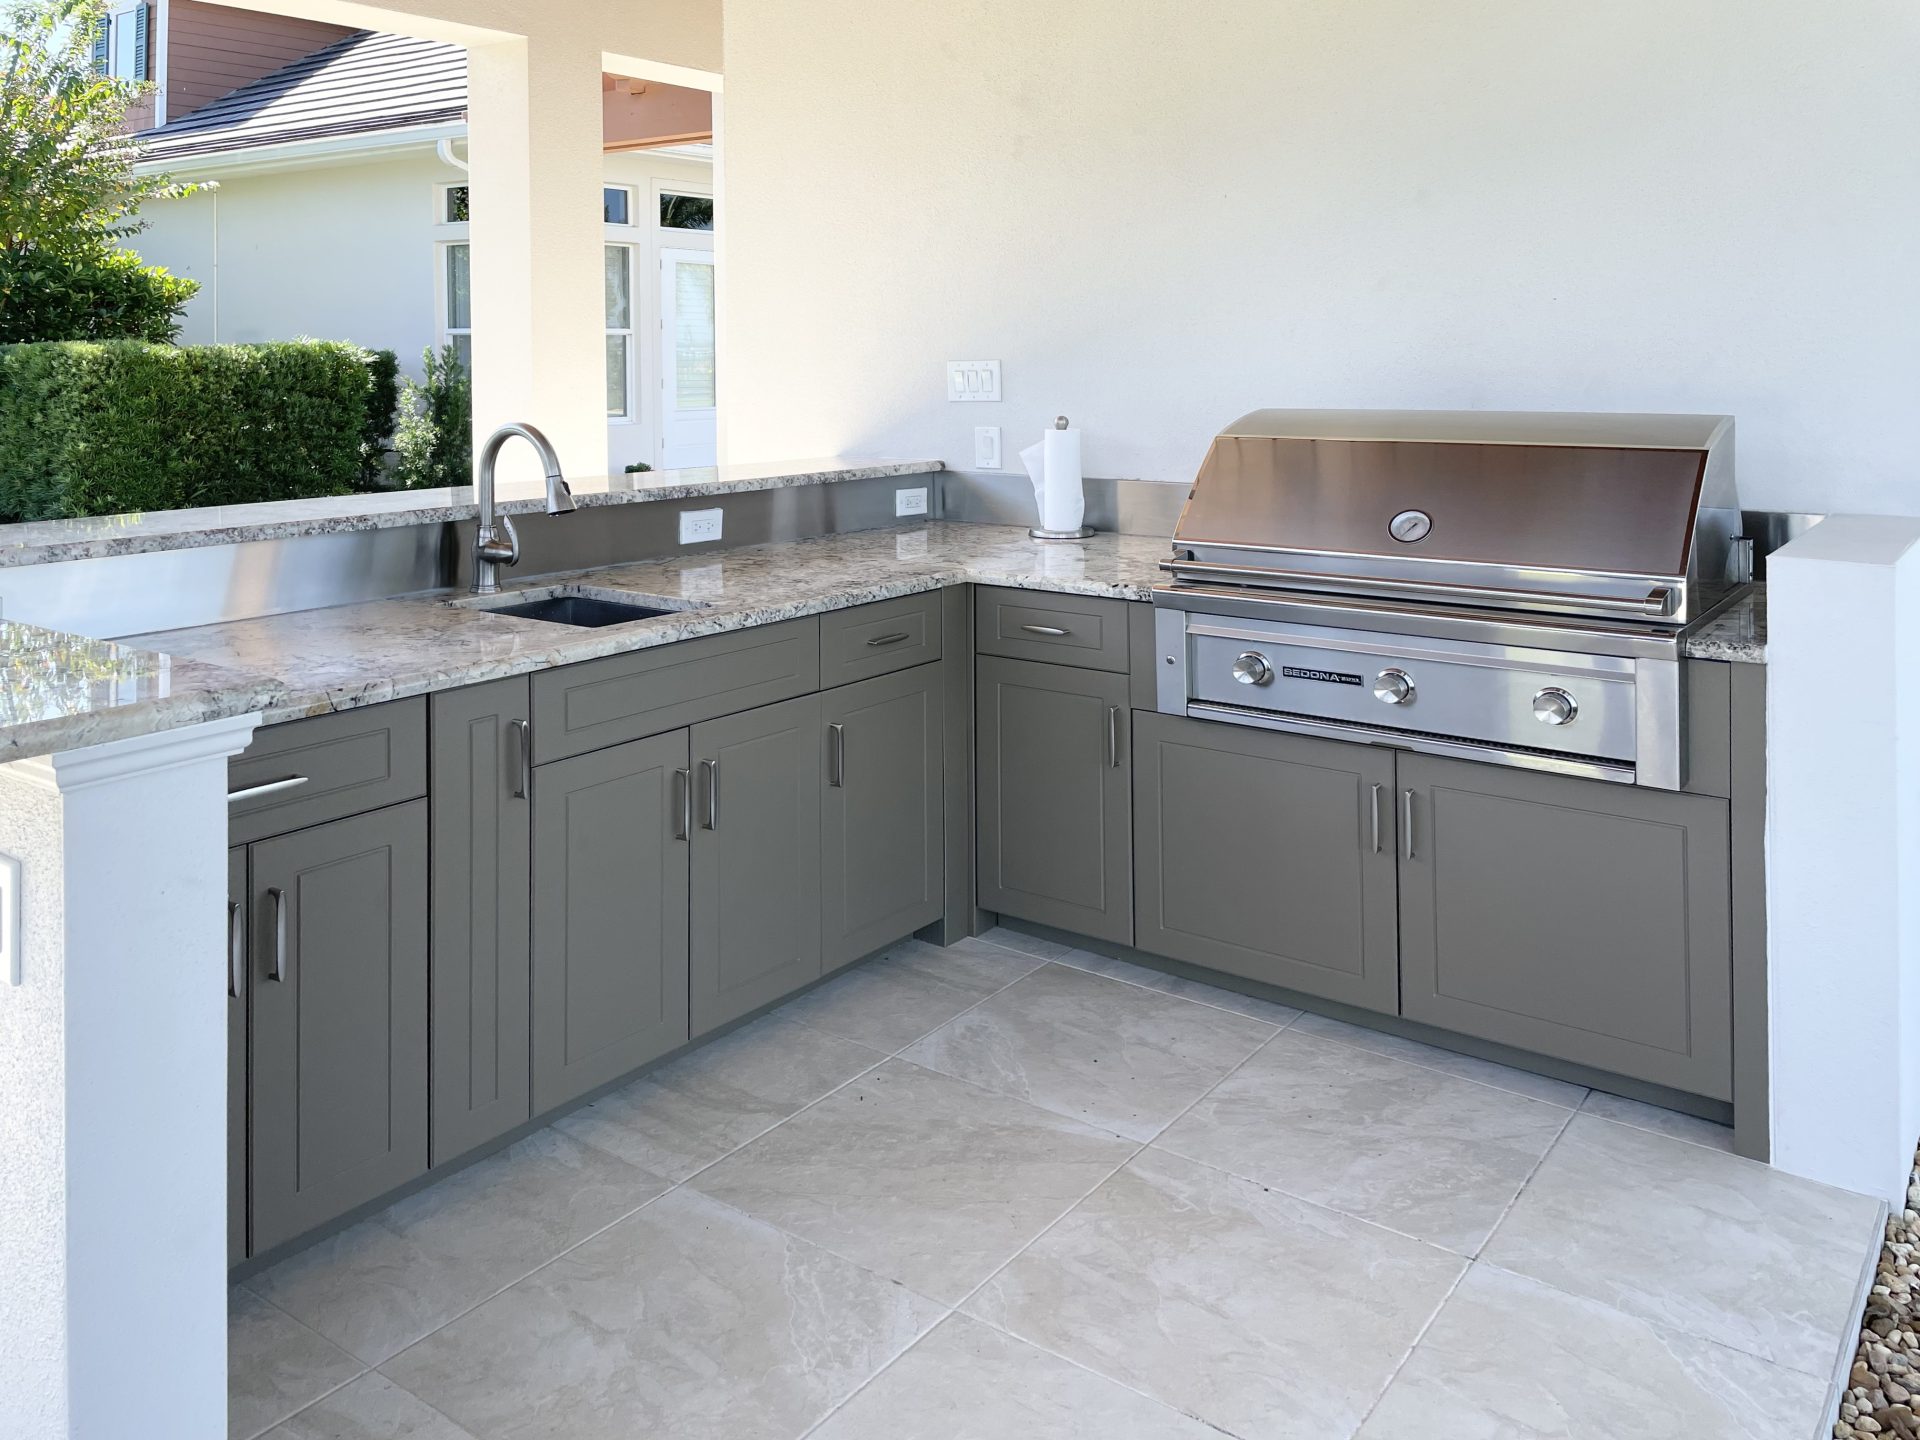 OUTDOOR KITCHEN 37. Custom outdoor kitchen in Lakewood Ranch, FL. Kitchen features slate gray, sport style cabinets. Appliances include Lynx grill and stainless bar pulls.